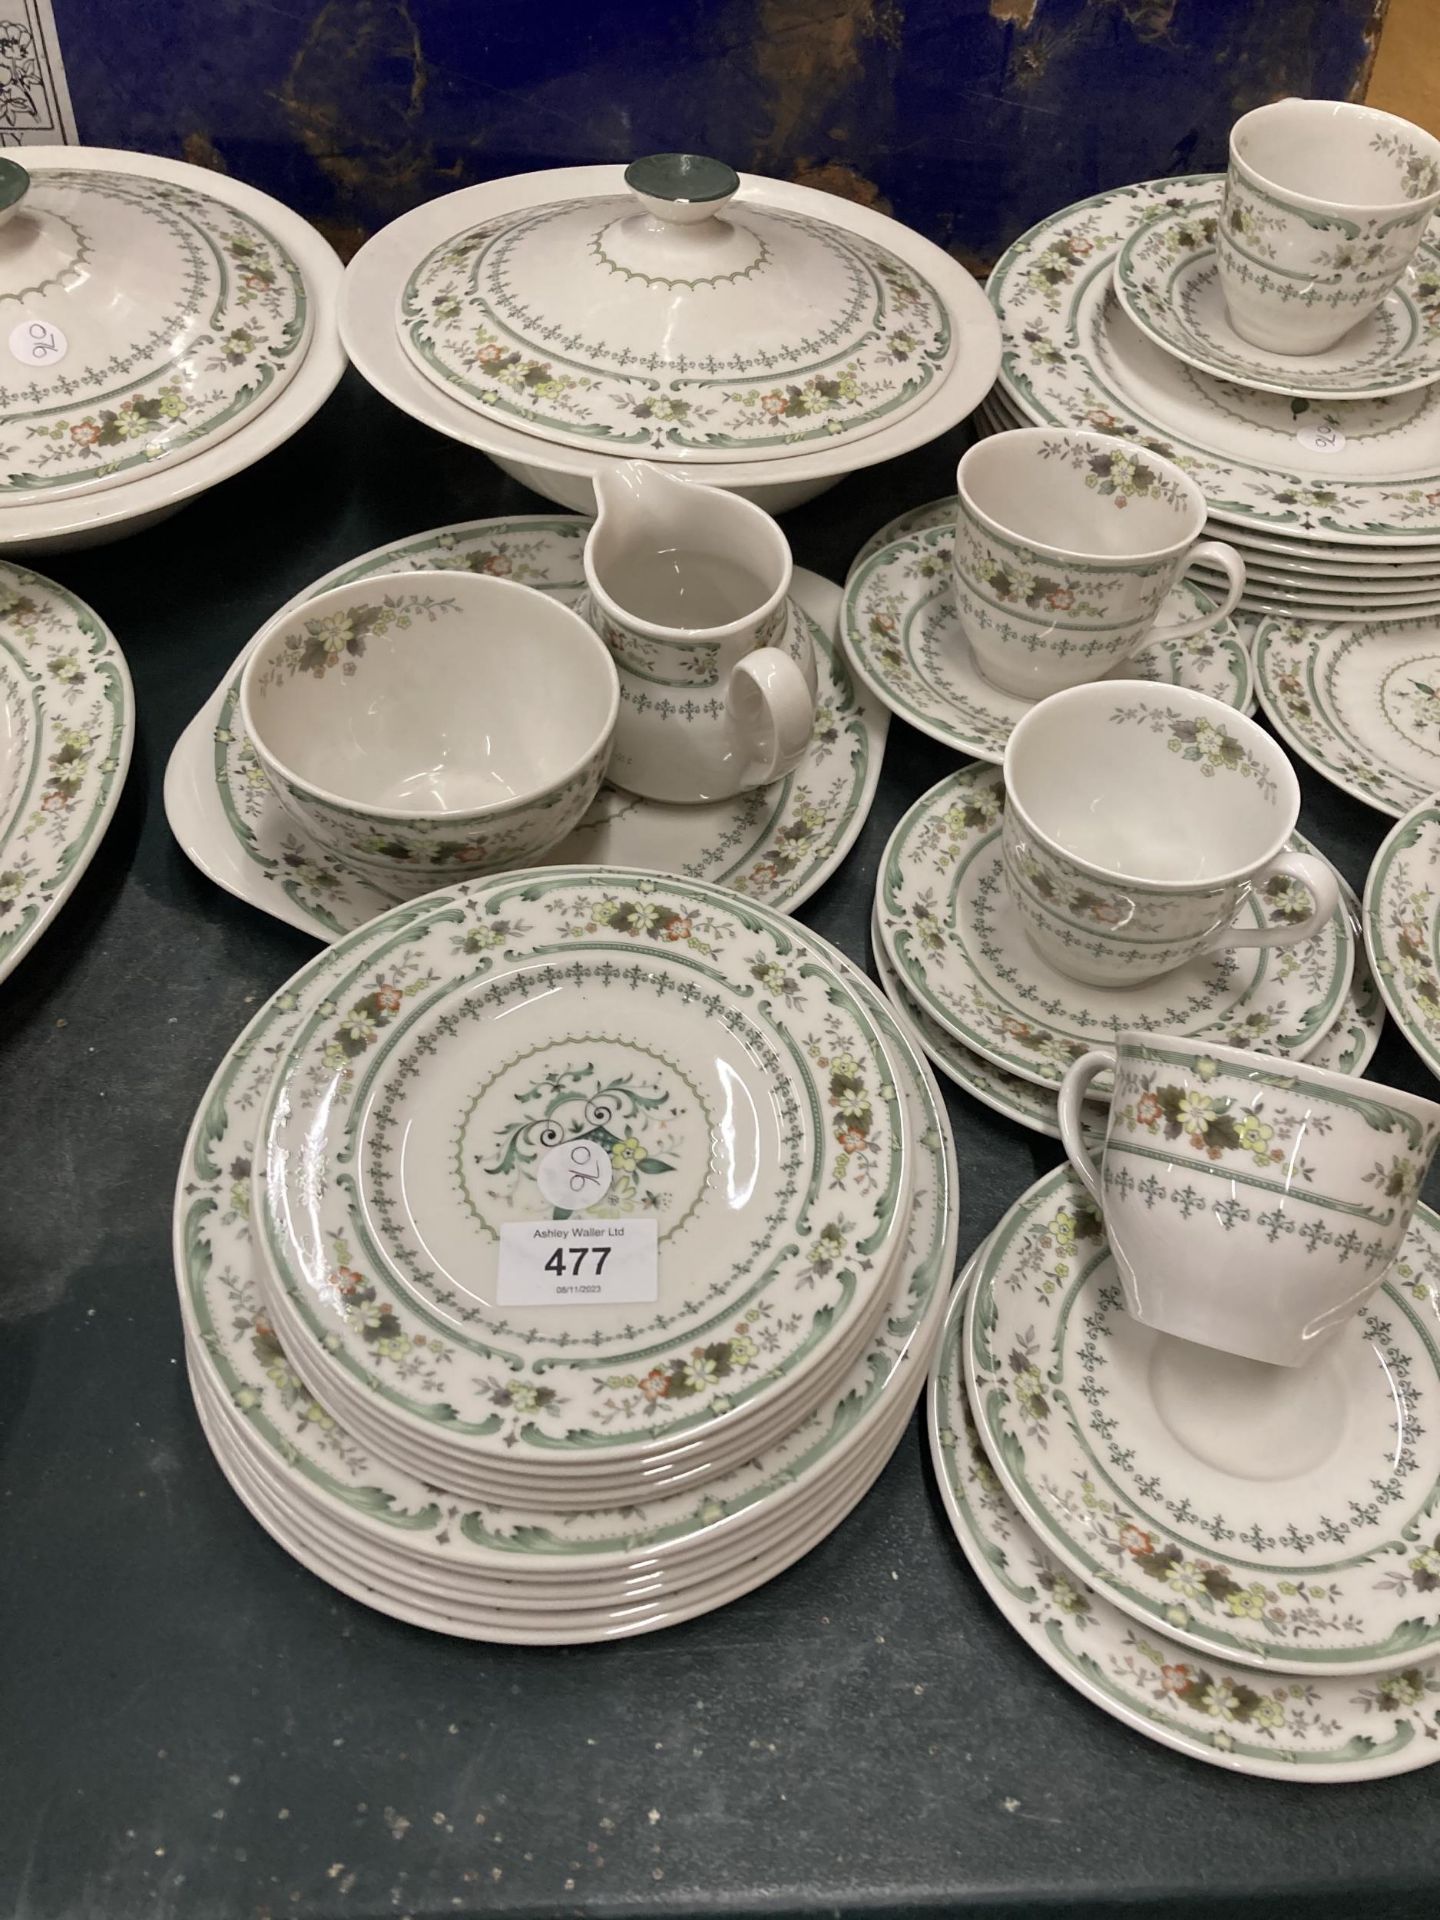 A ROYAL DOULTON PART DINNER SERVICE TO INCLUDE SERVING TUREENS, SERVING PLATES, A SAUCE BOAT WITH - Image 3 of 5